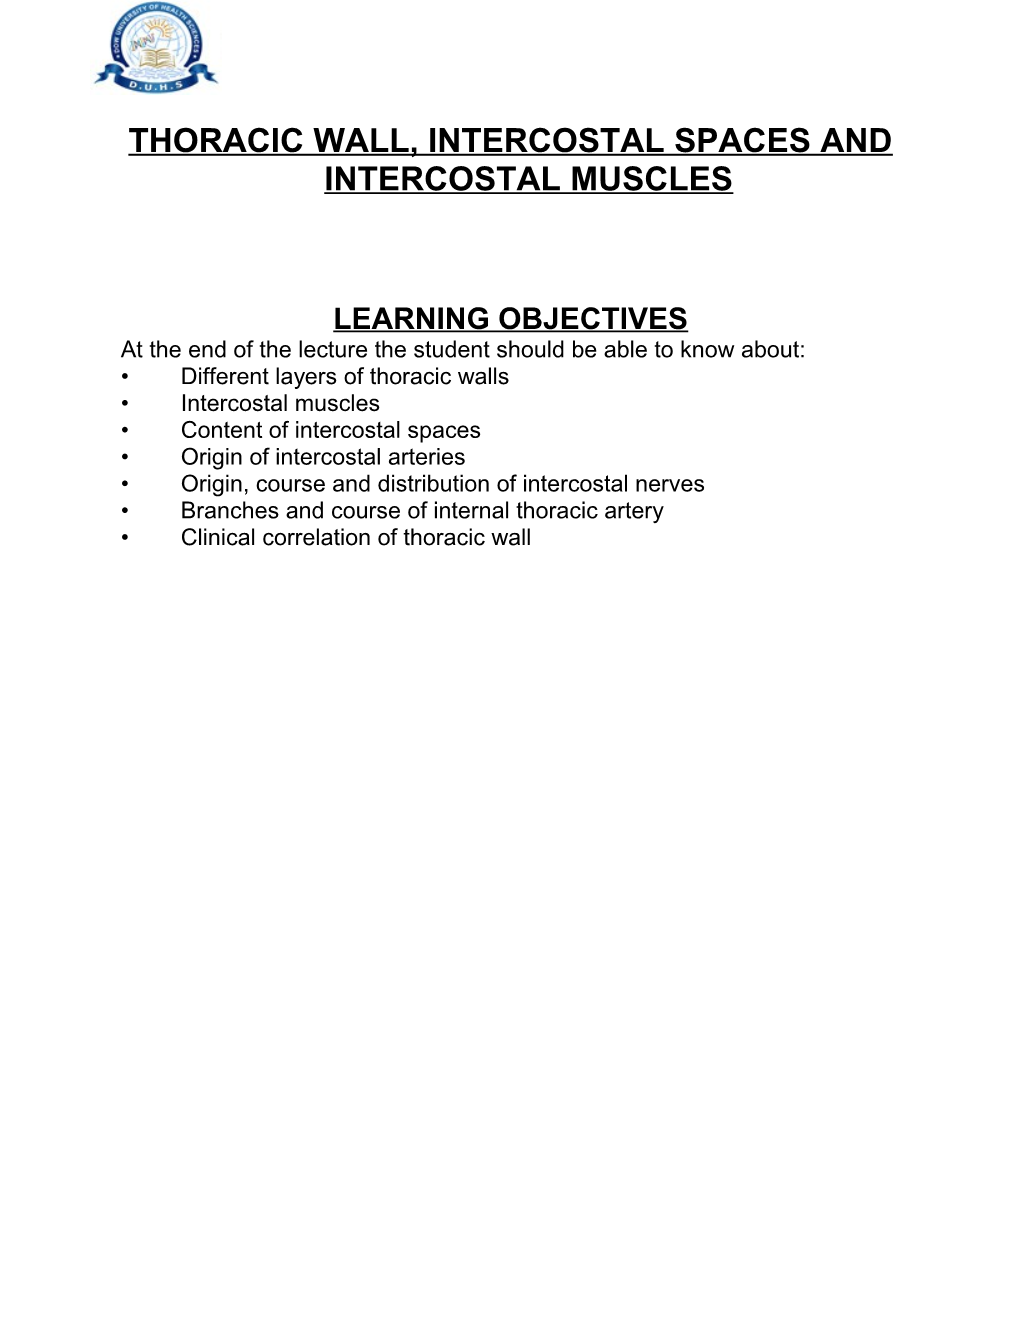 Thoracic Wall, Intercostal Spaces and Intercostal Muscles